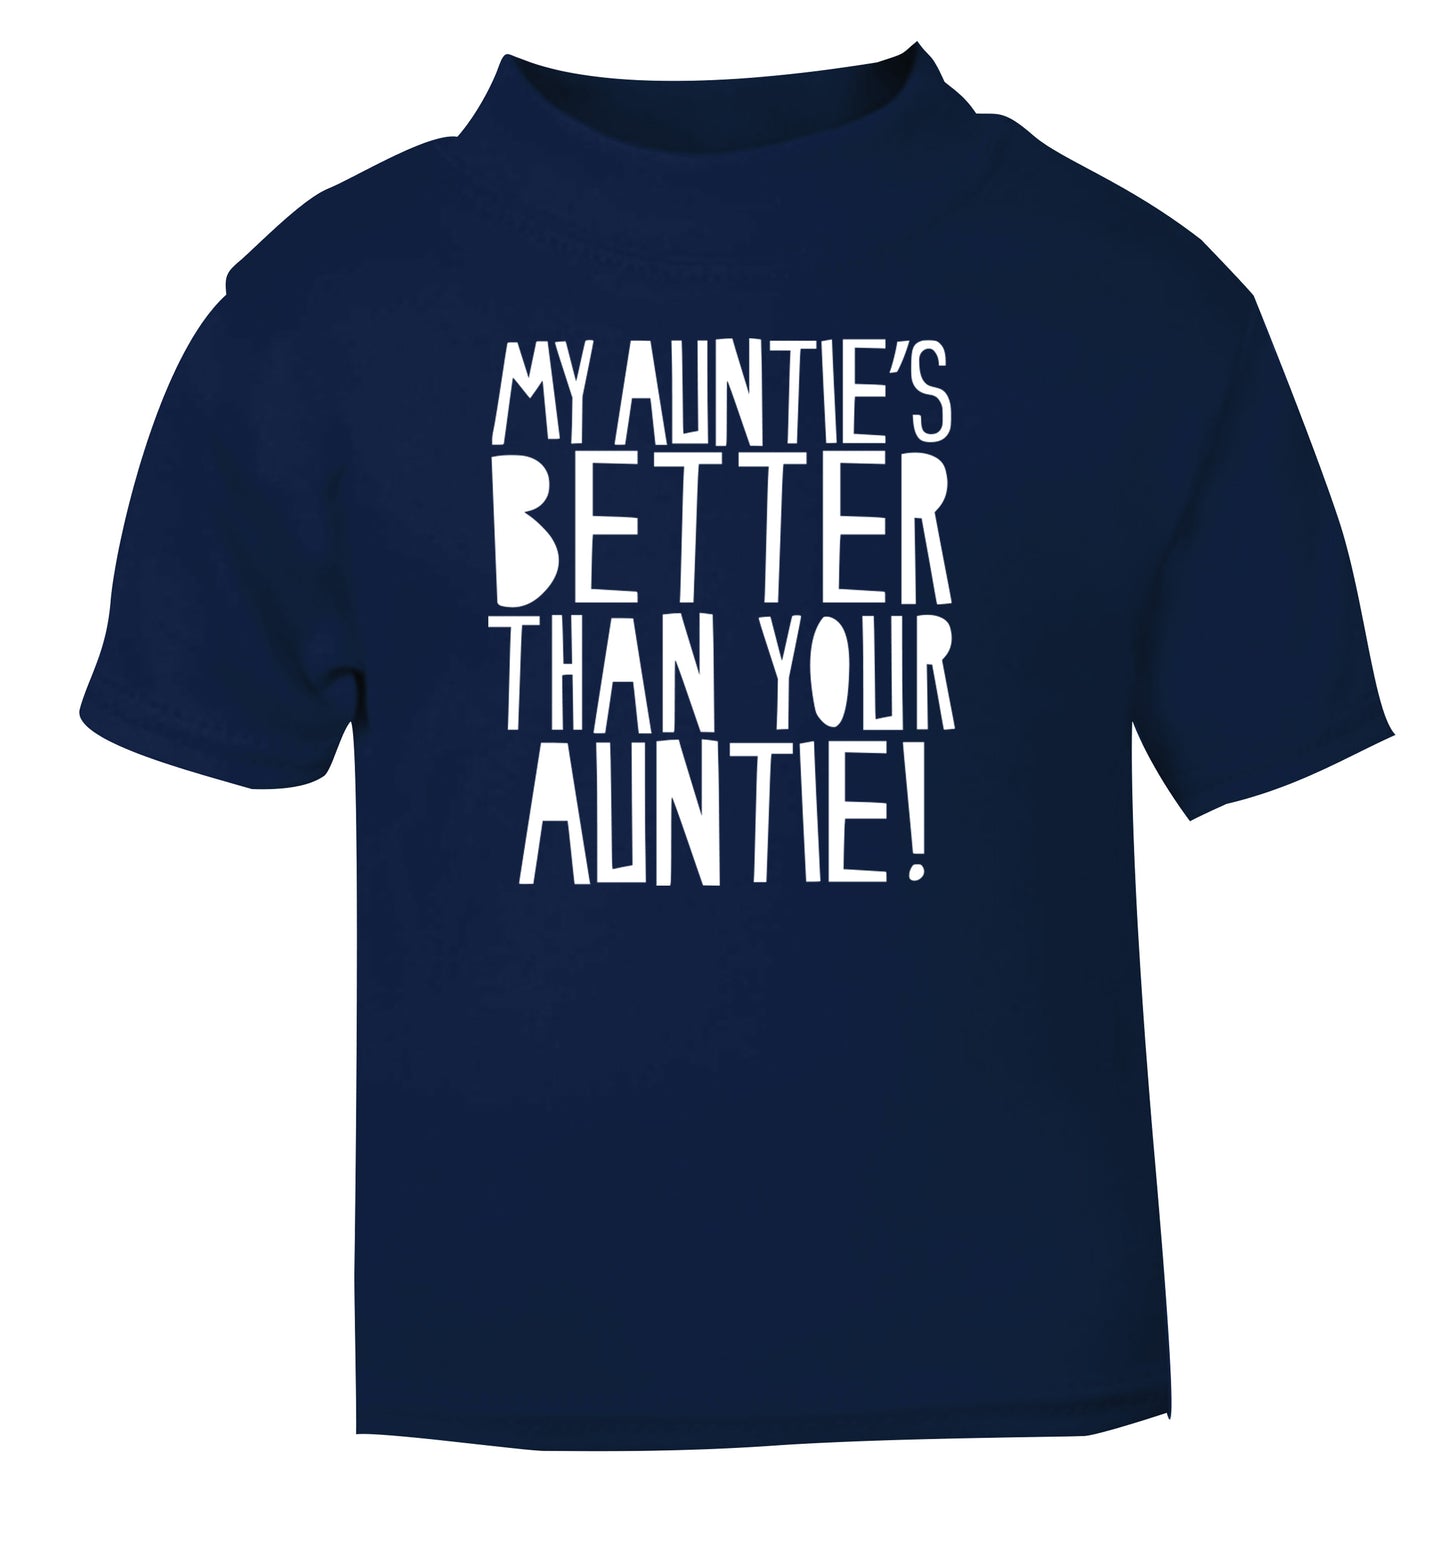 My auntie's better than your auntie navy Baby Toddler Tshirt 2 Years